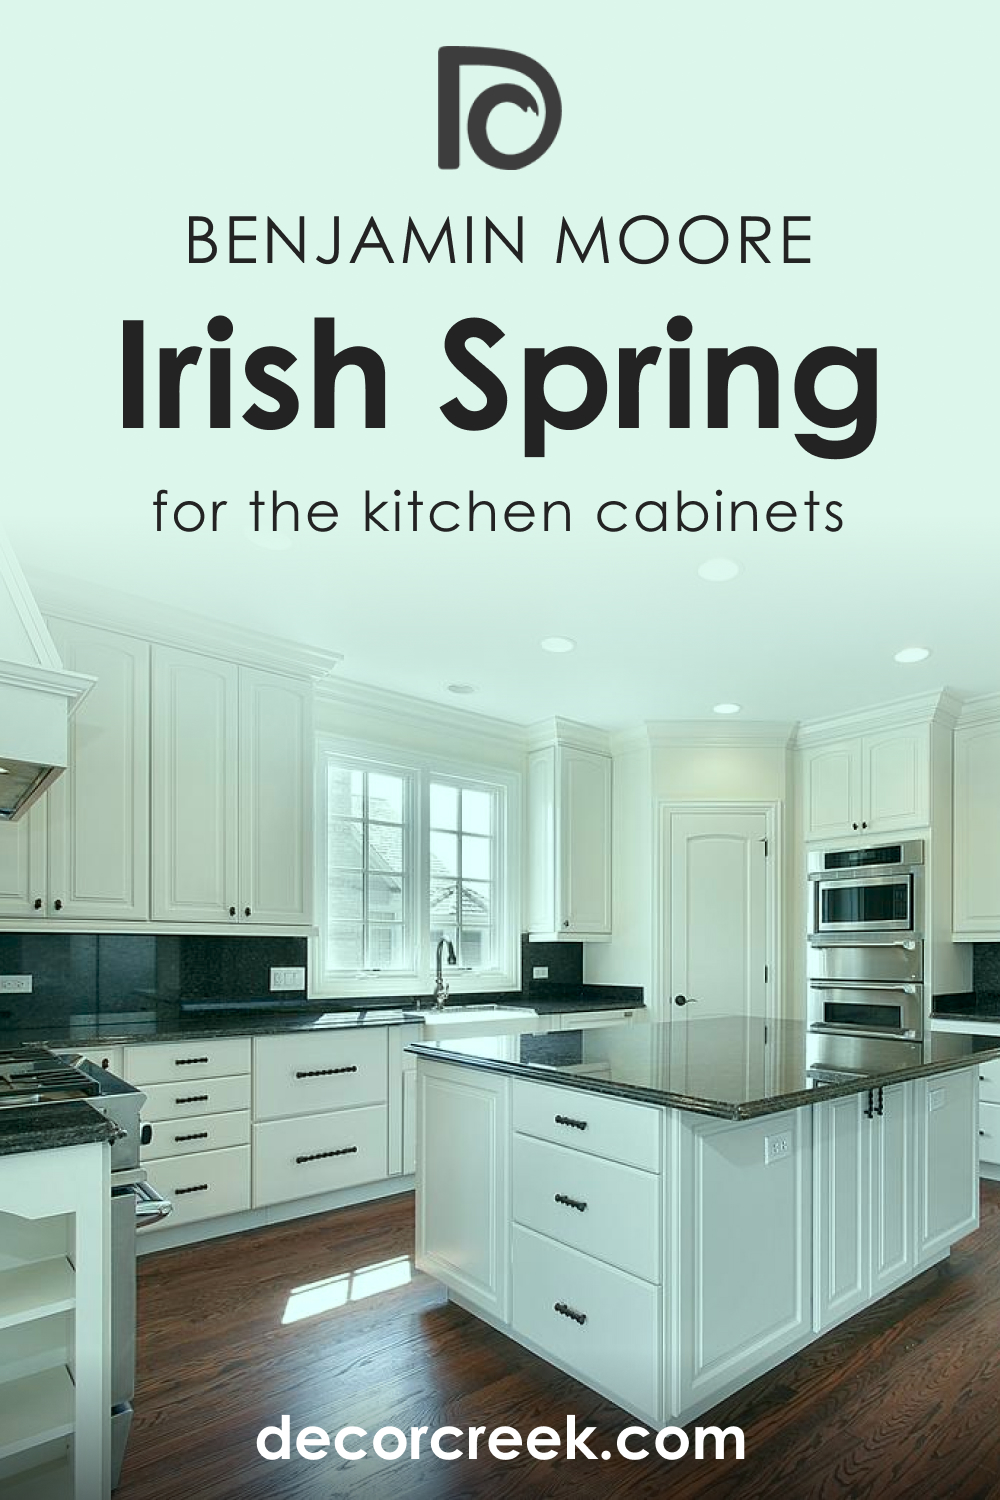 How to Use Irish Spring 2038-70 on the Kitchen Cabinets